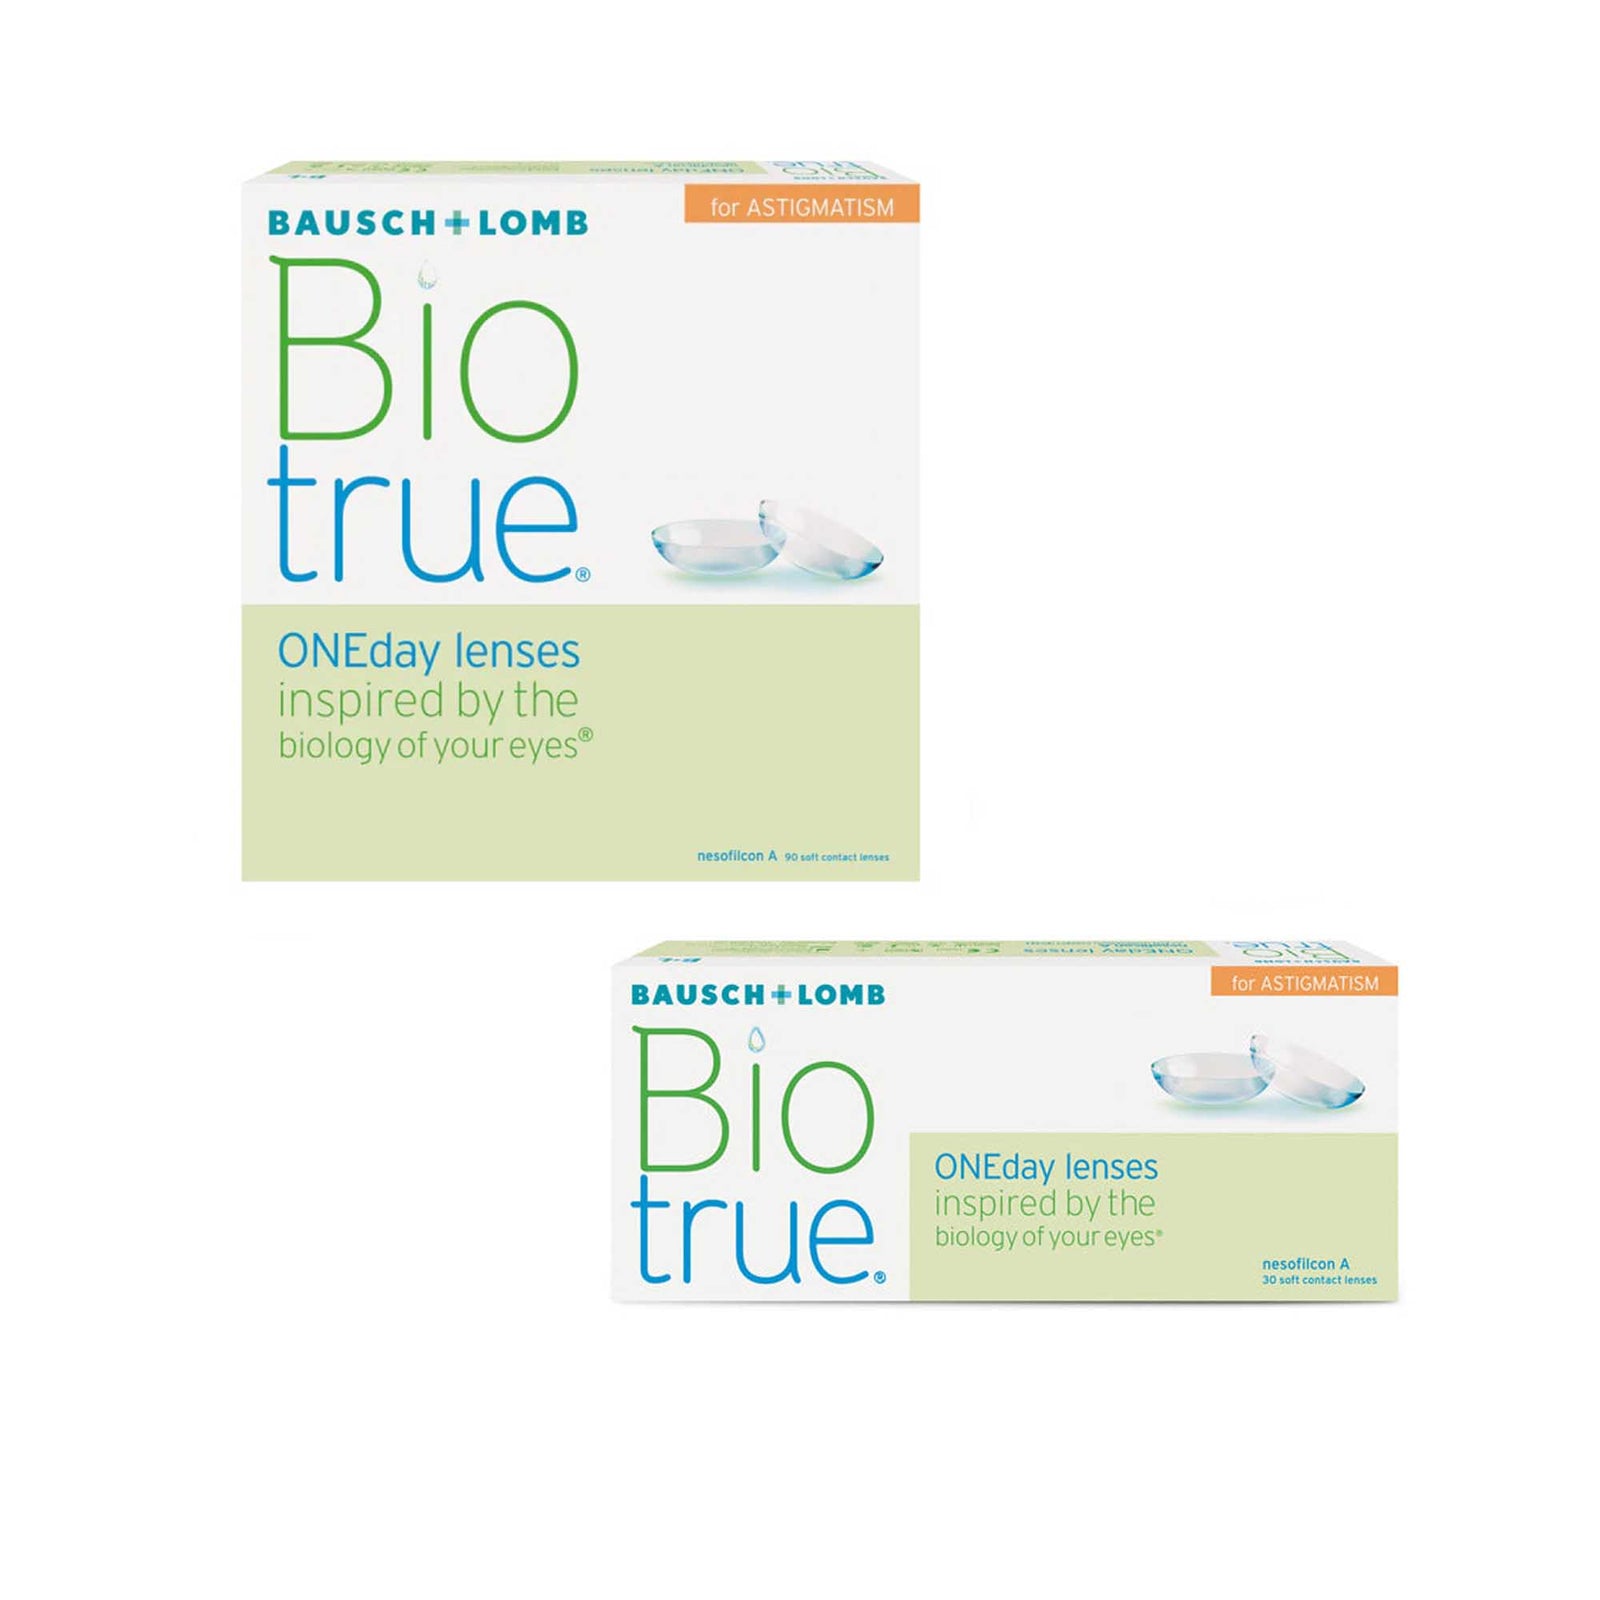 Bausch & Lomb : Biotrue ONEday for Astigmatism - 4 Month Supply